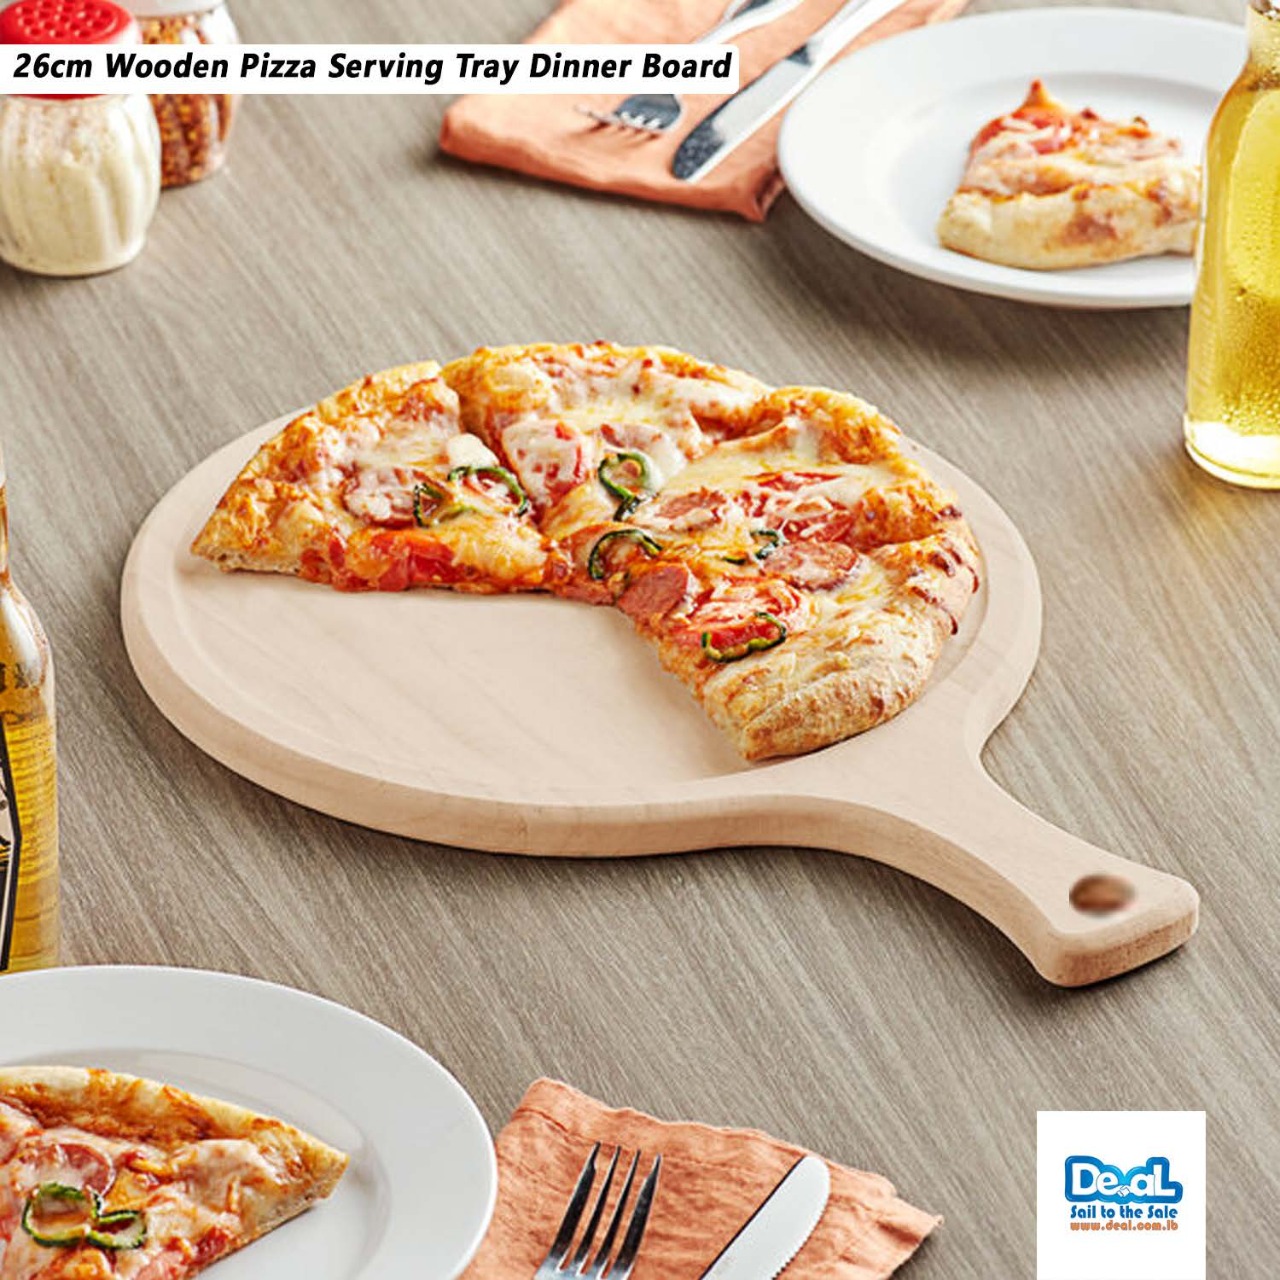 26cm Wooden Pizza Serving Tray Dinner Board